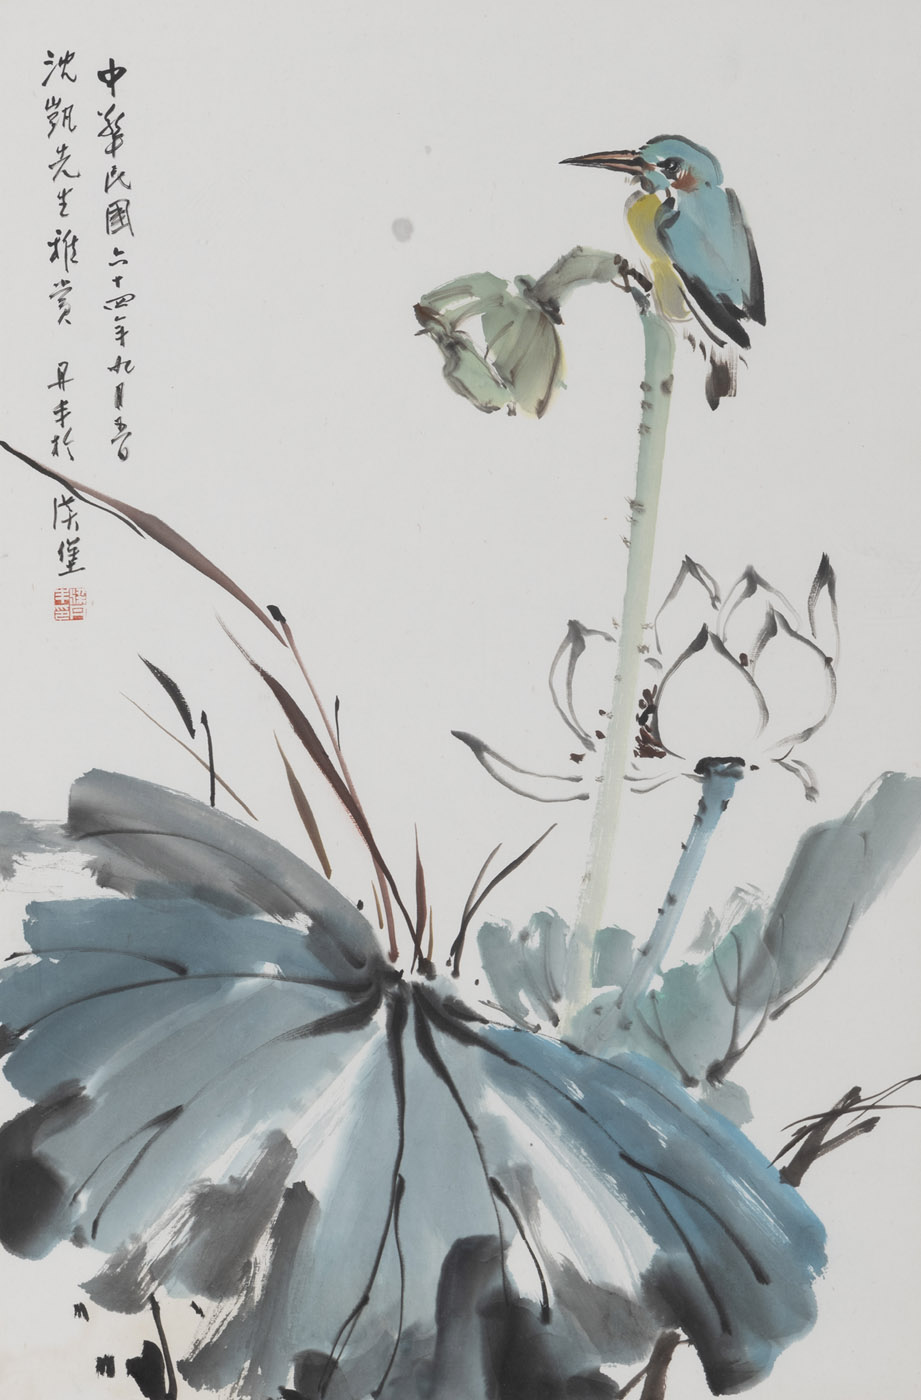 <b>LIANG DANFENG (1935-2021): KINGFISHER AND LOTUS. INK AND COLORS ON PAPER</b>